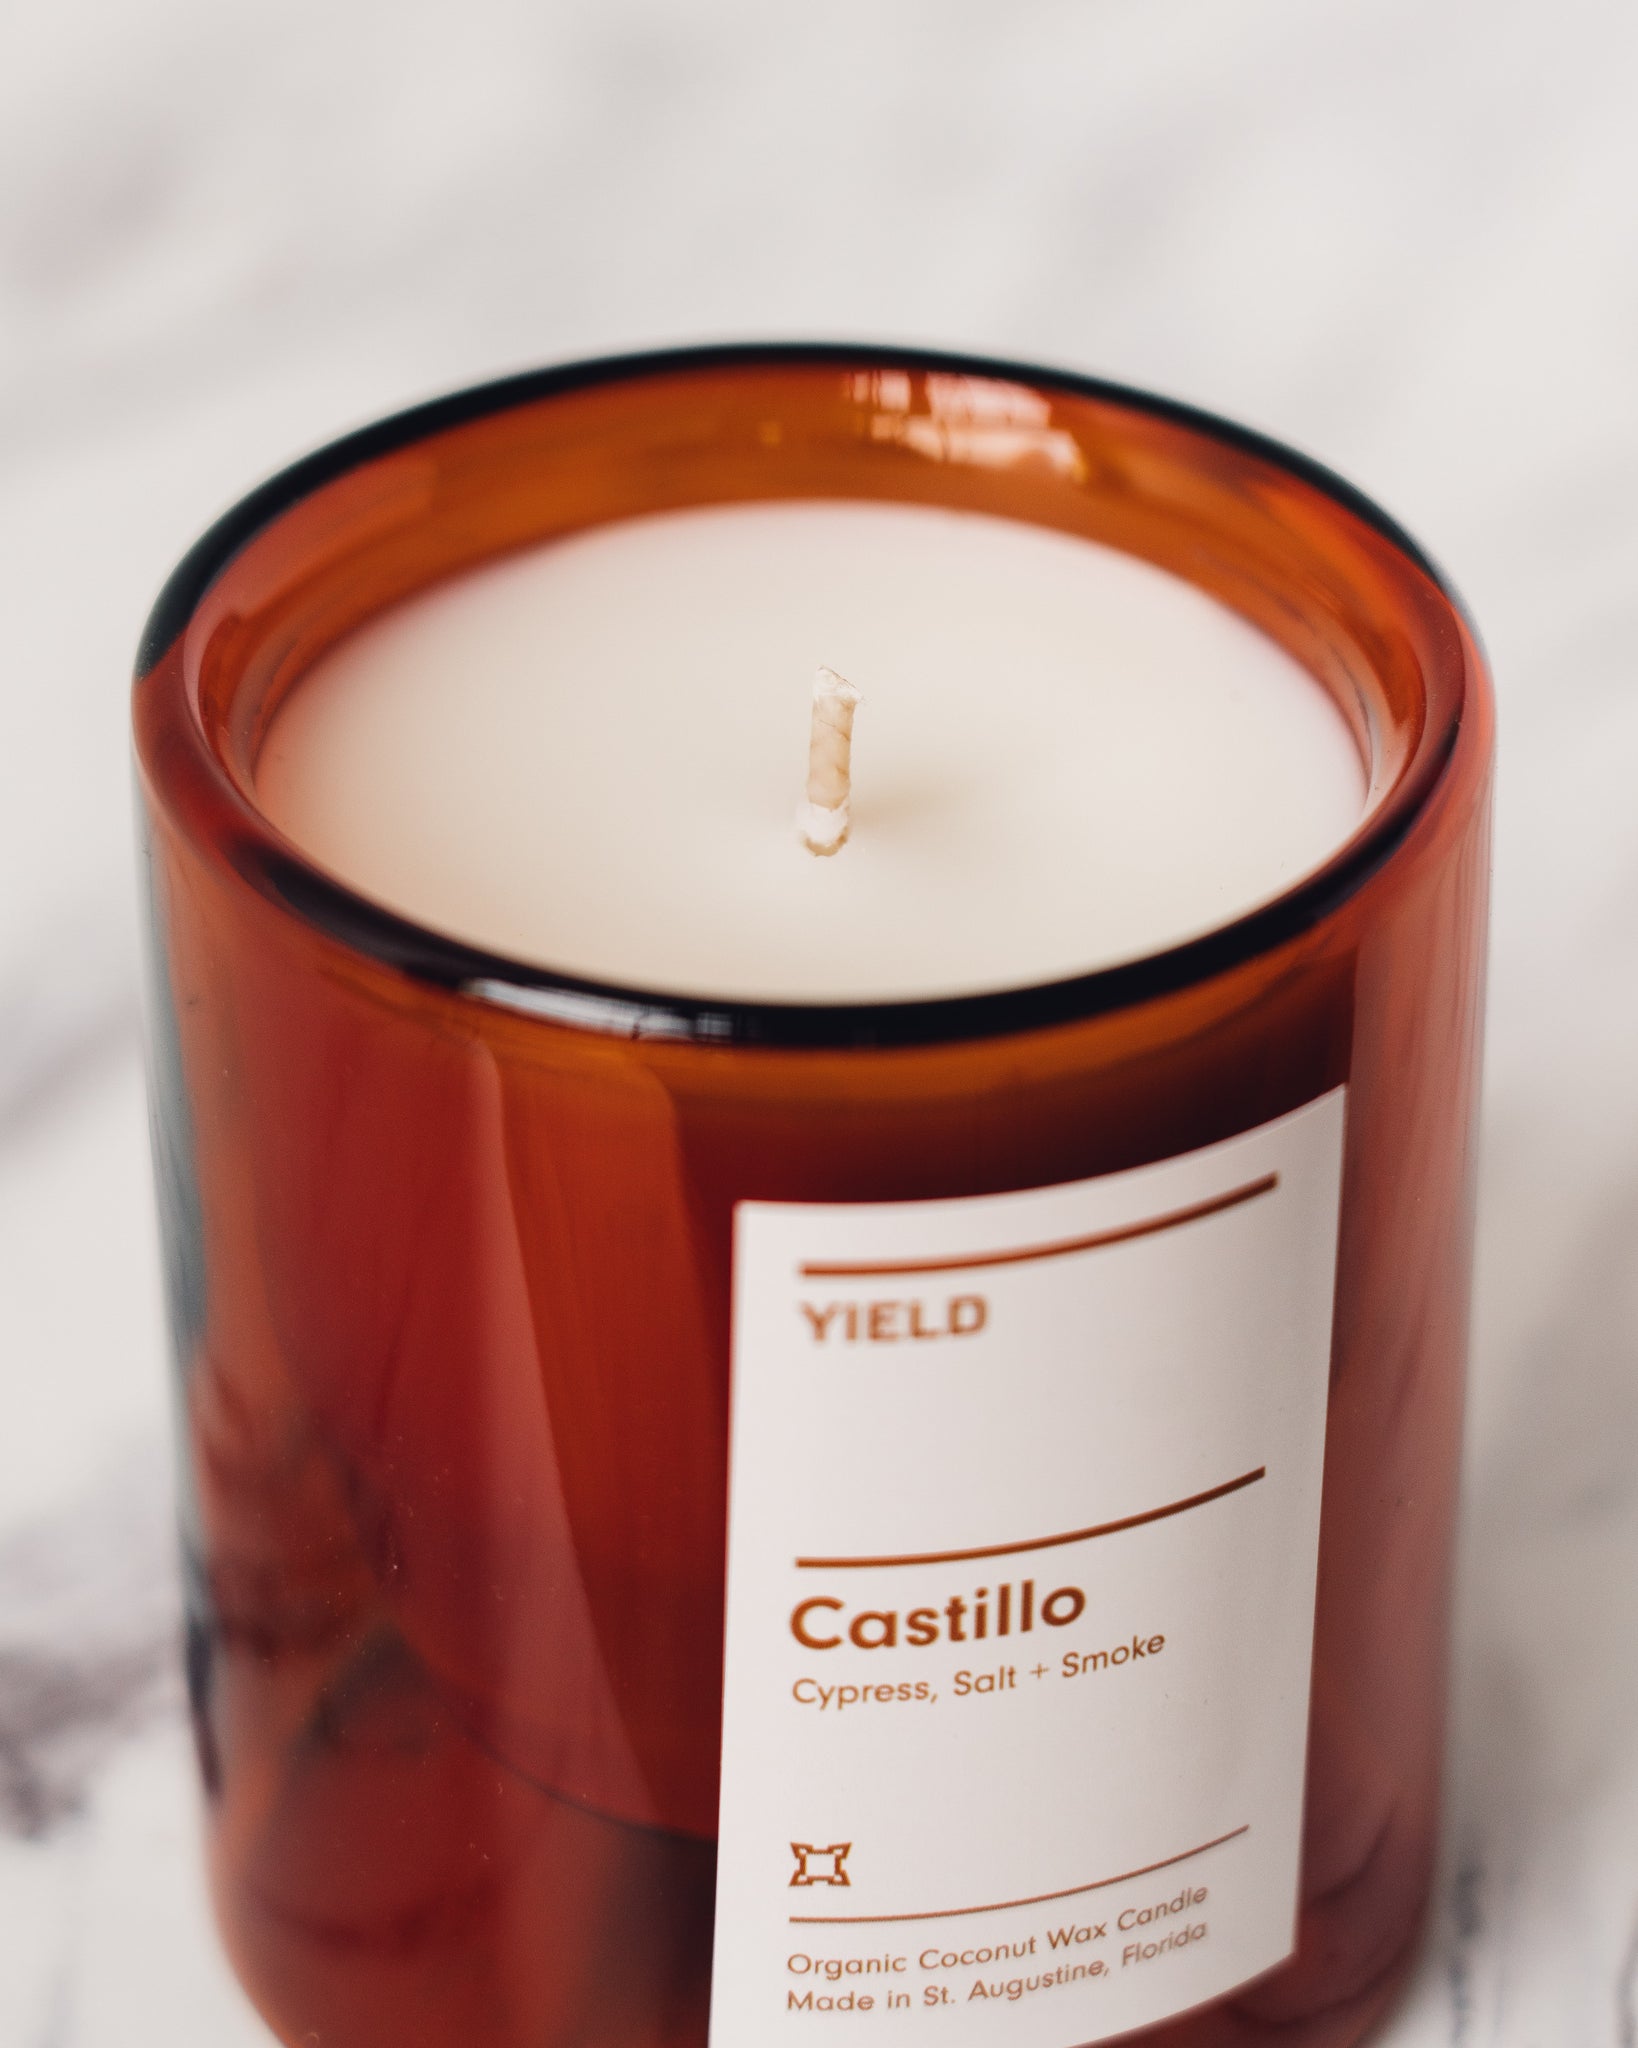 Yield Castillo Double-Wall Candle